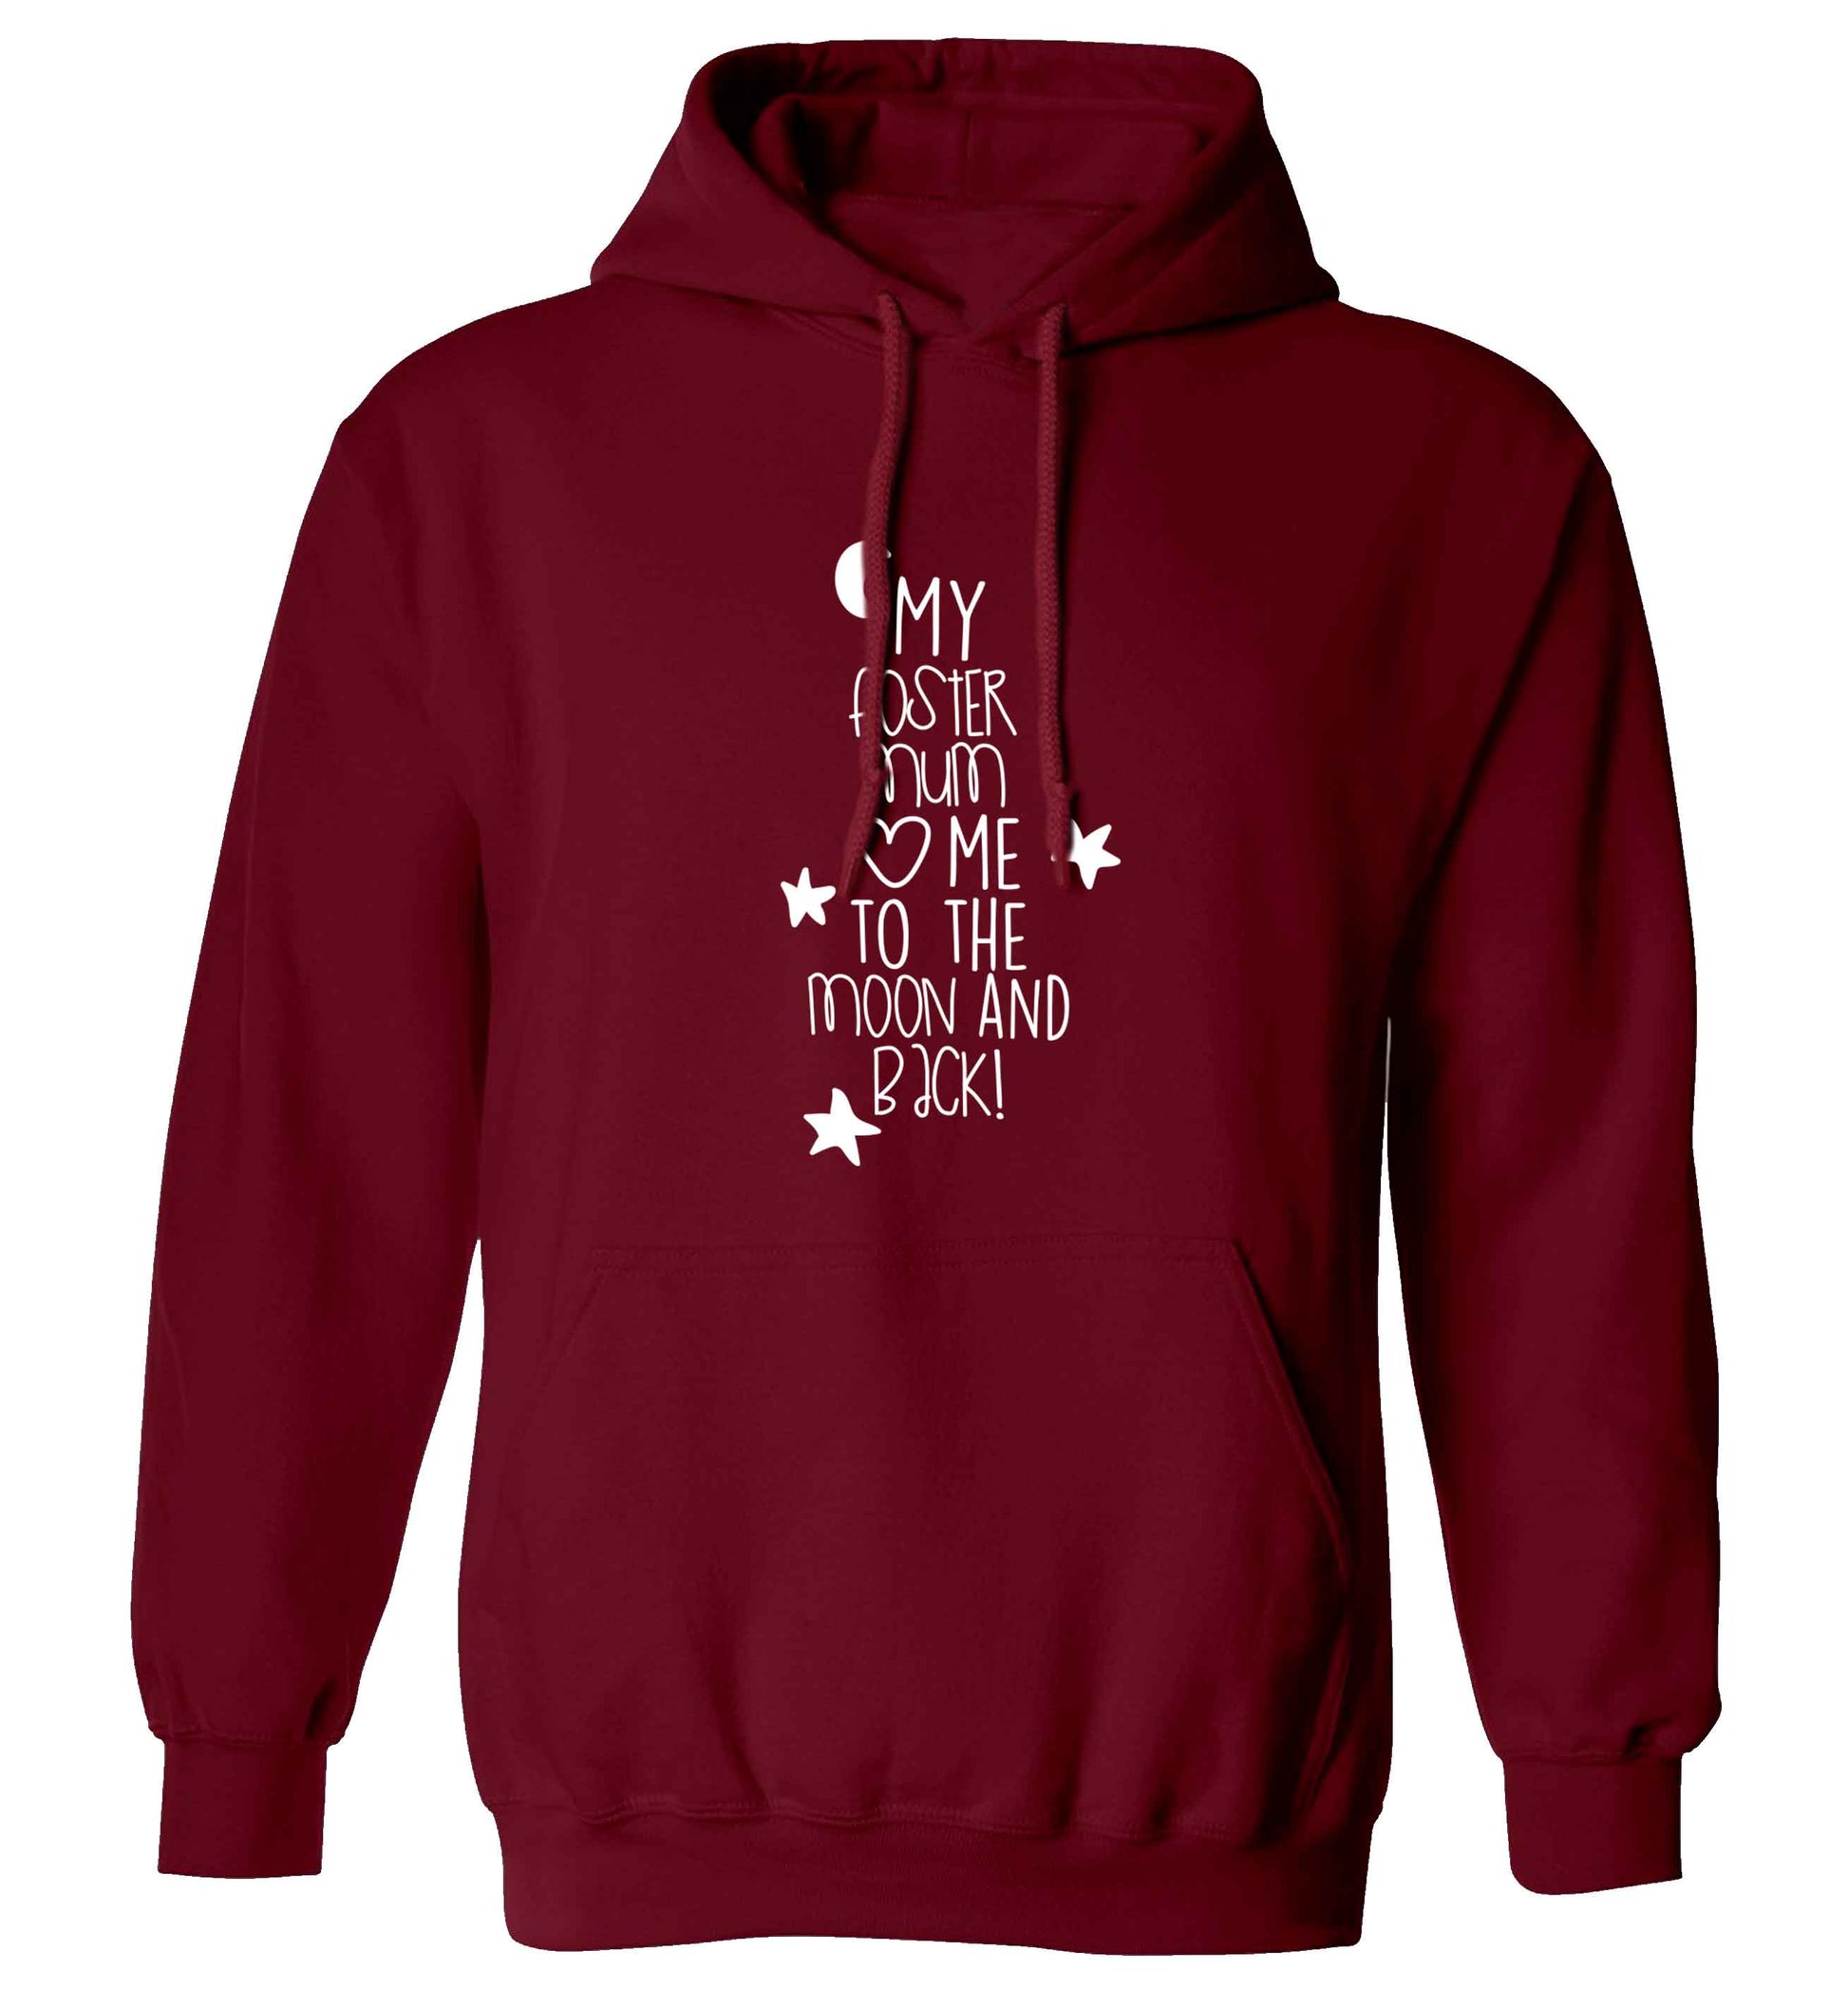 My foster mum loves me to the moon and back adults unisex maroon hoodie 2XL